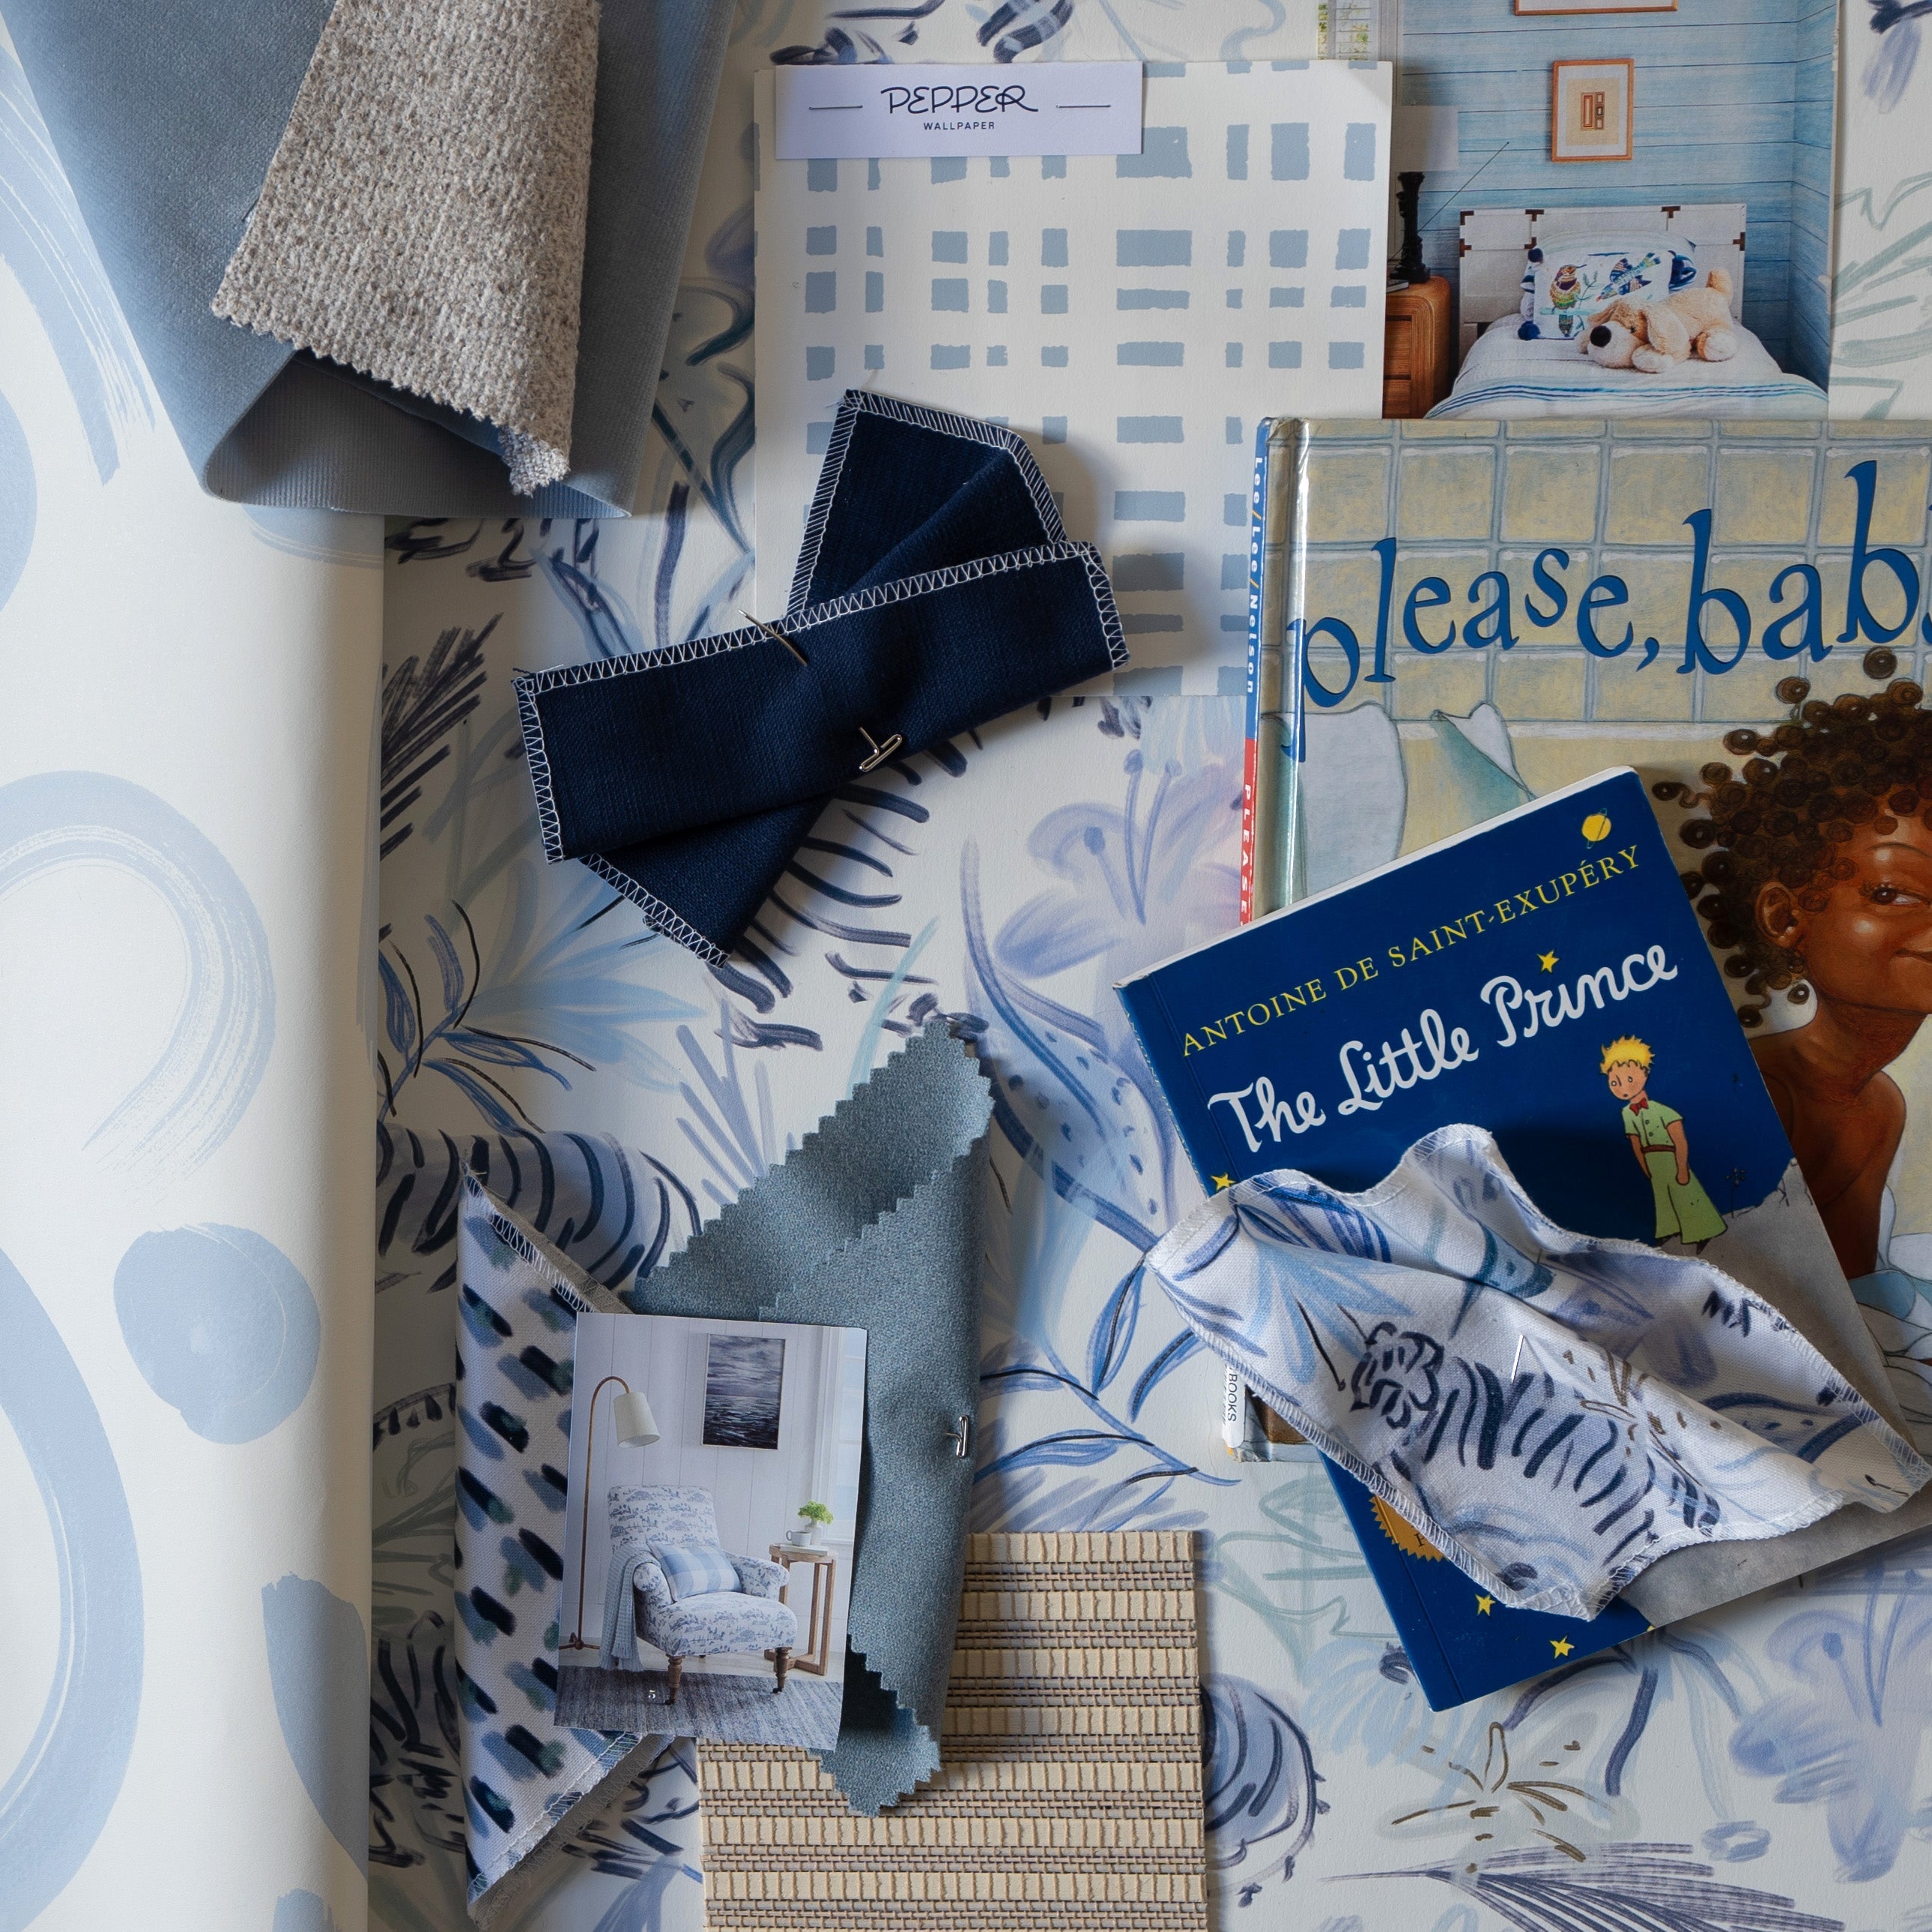 Interior design moodboard and fabric inspirations with Blue Chinoiserie Tiger Printed Swatch, Sky Blue Gingham Printed Swatch, Sky and Navy Blue Poppy Printed Swatch, Sky Blue Swatch, and navy velvet swatch